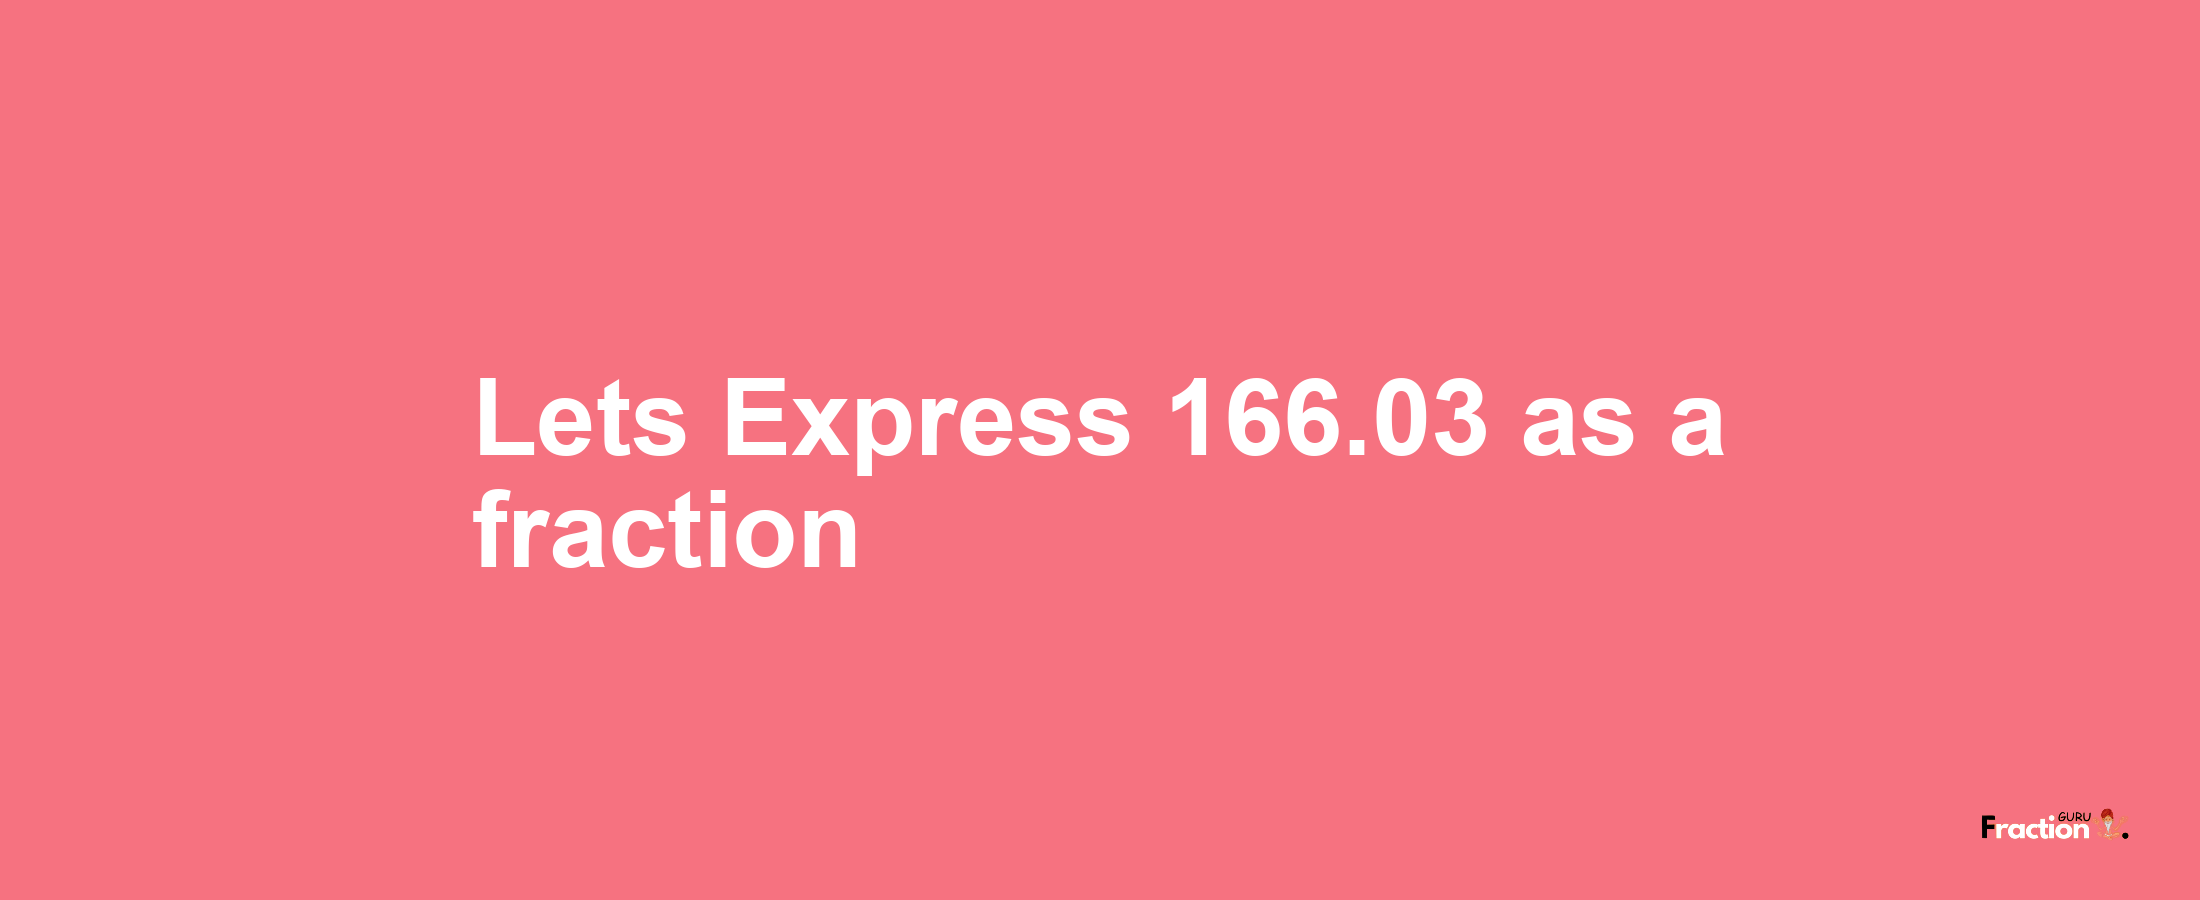 Lets Express 166.03 as afraction